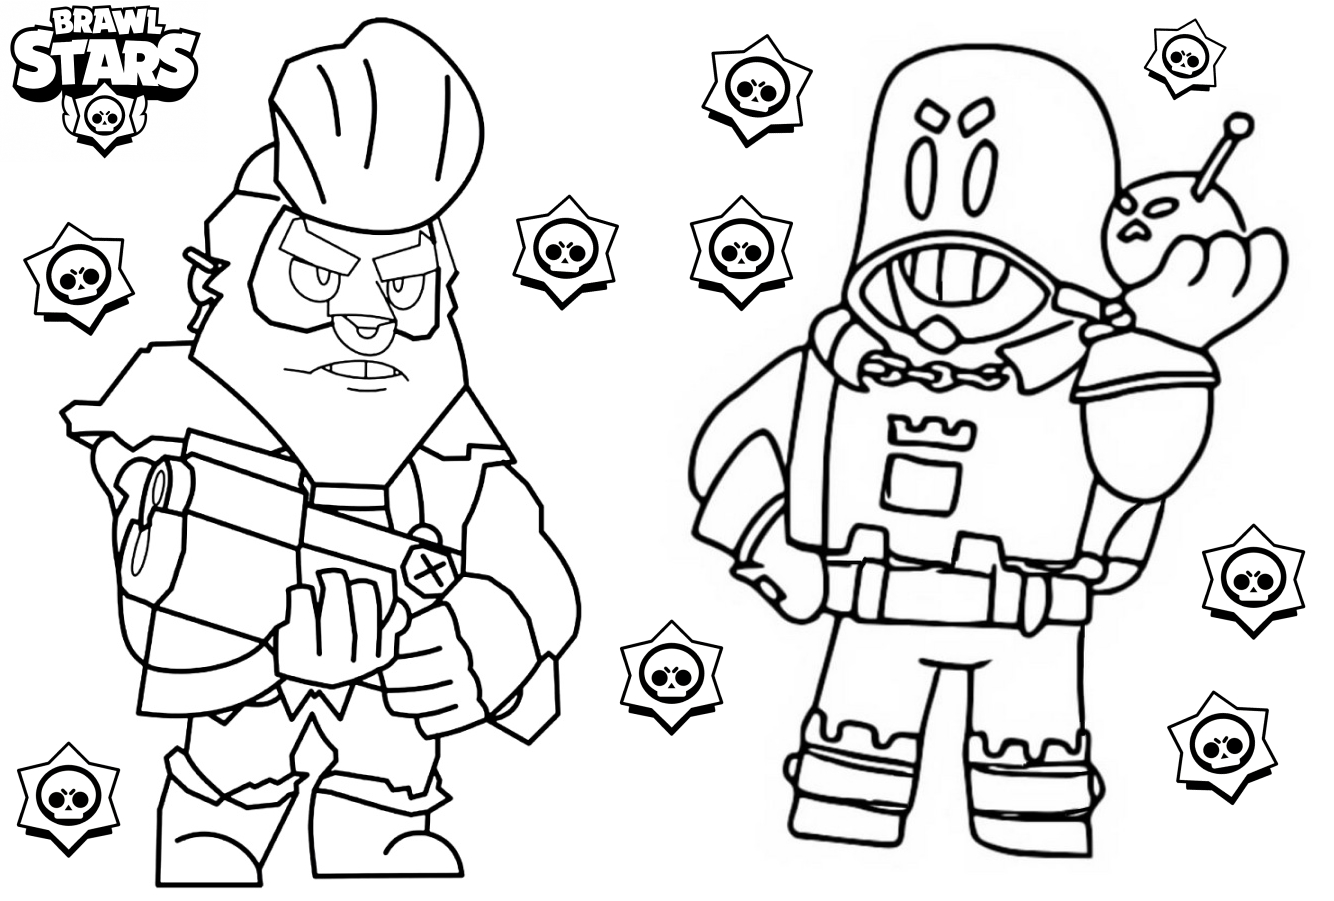 Coloring page Brawl Stars Grom and a Colt